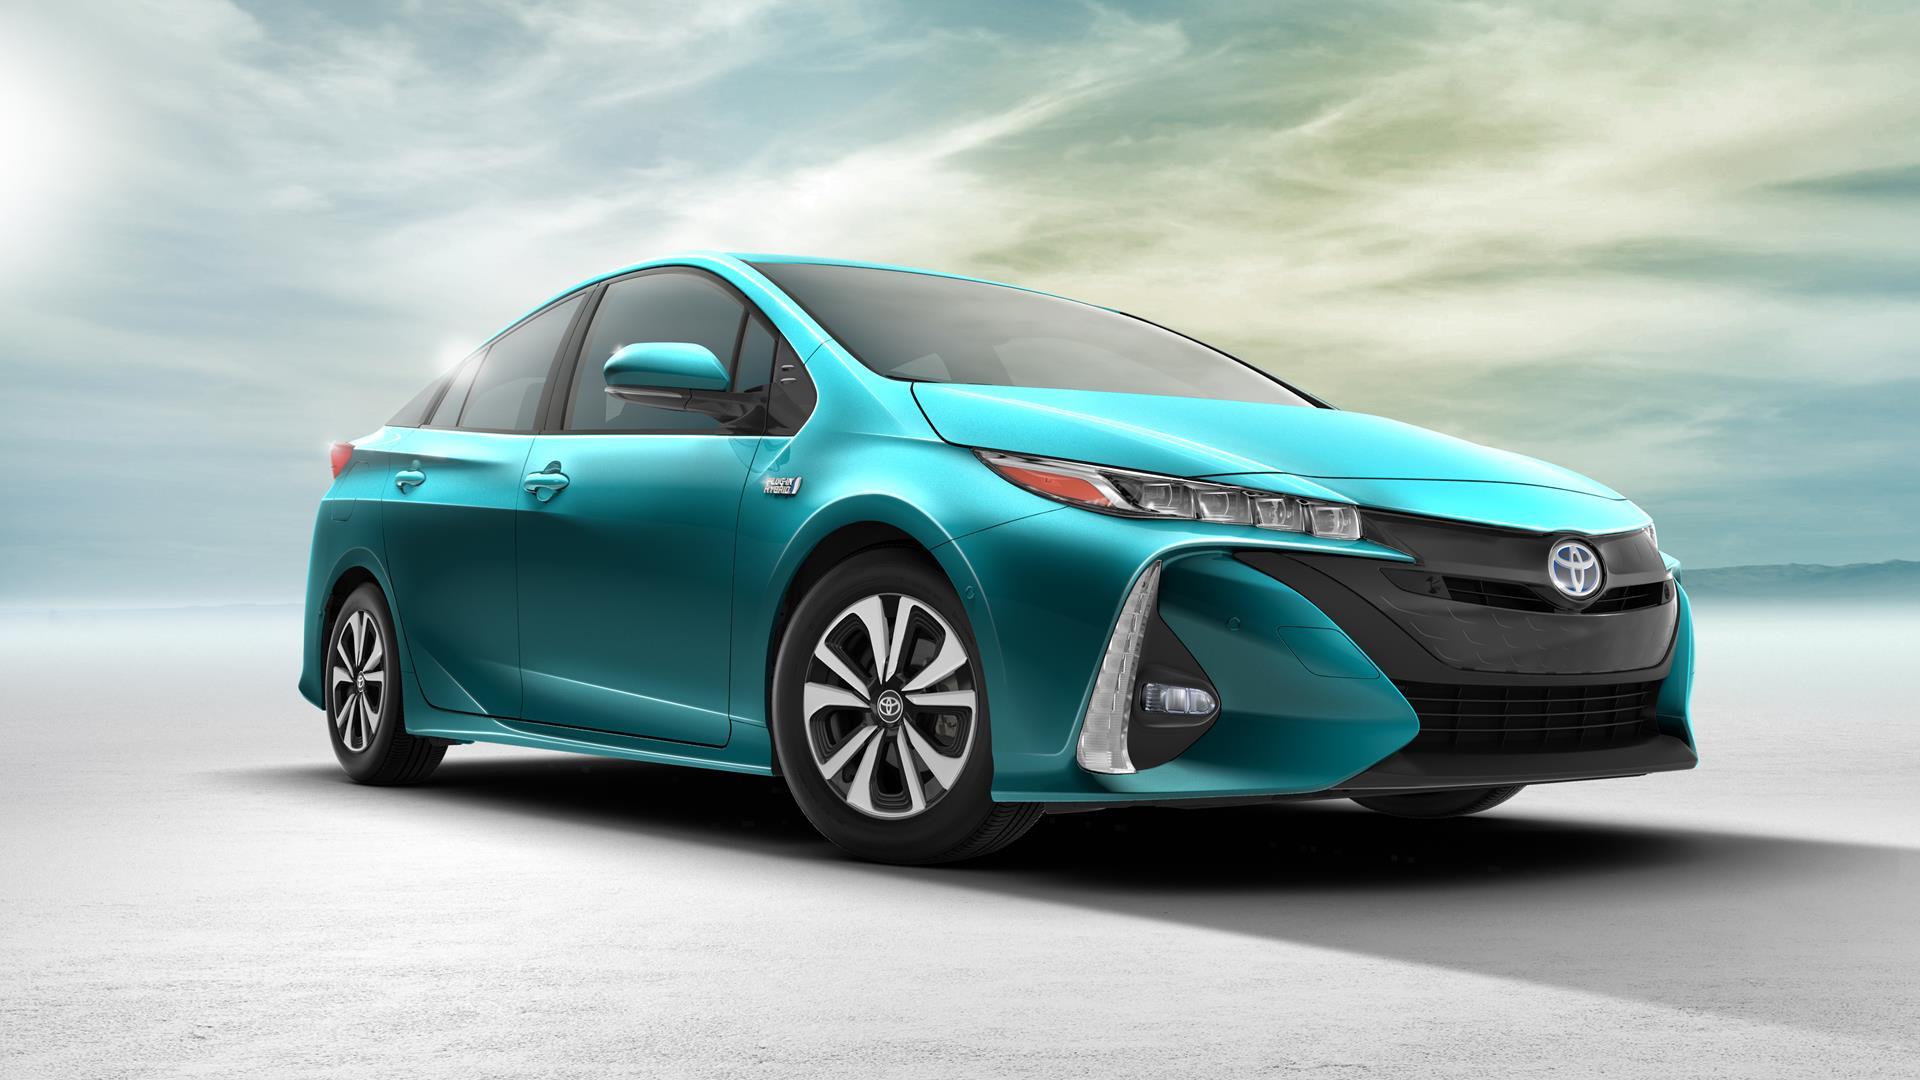 Toyota Prius Prime Wallpaper and Image Gallery